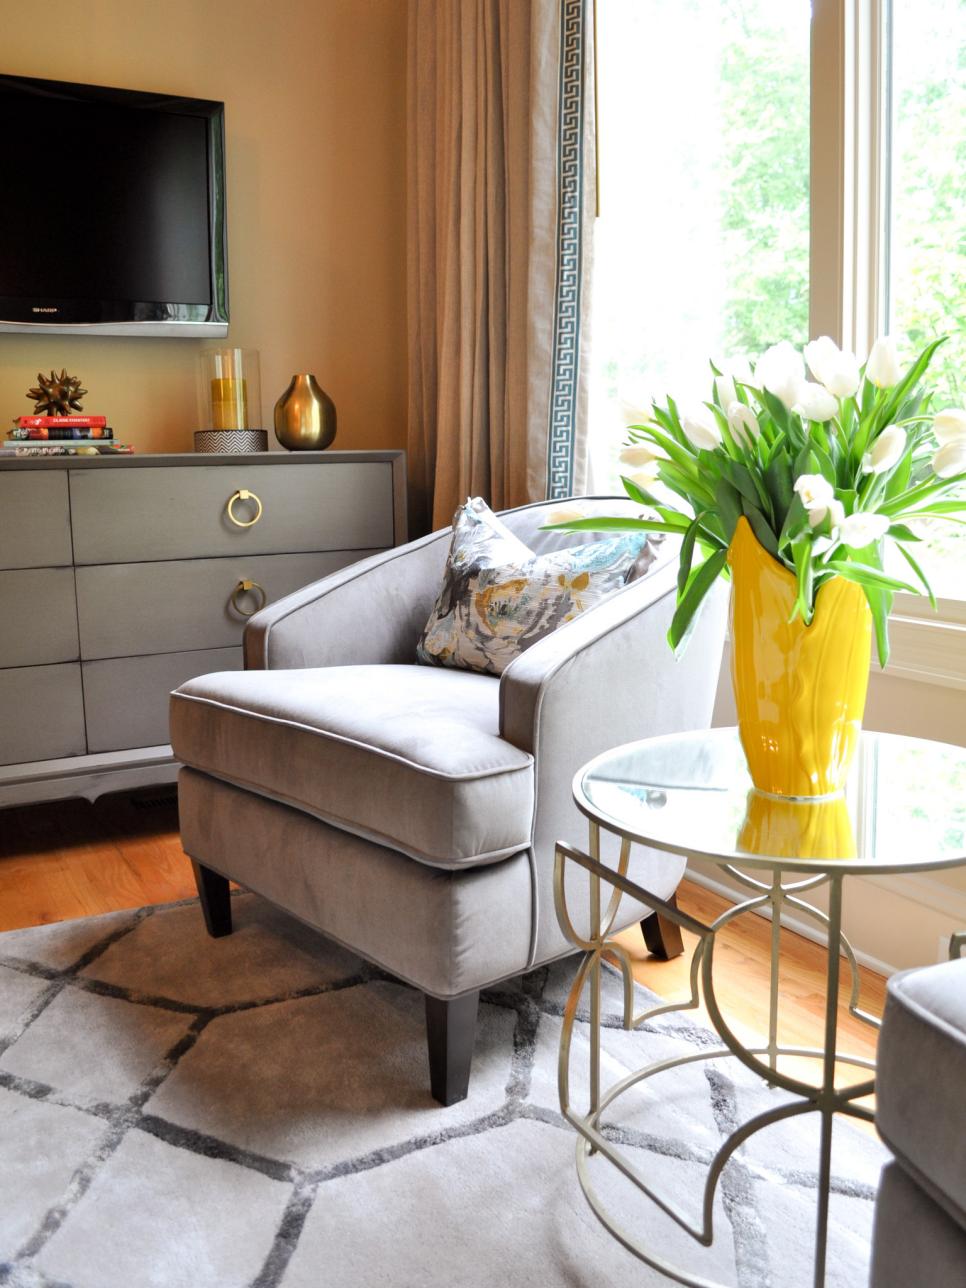 Grey and beige transitional bedroom seating area with a yellow vase.